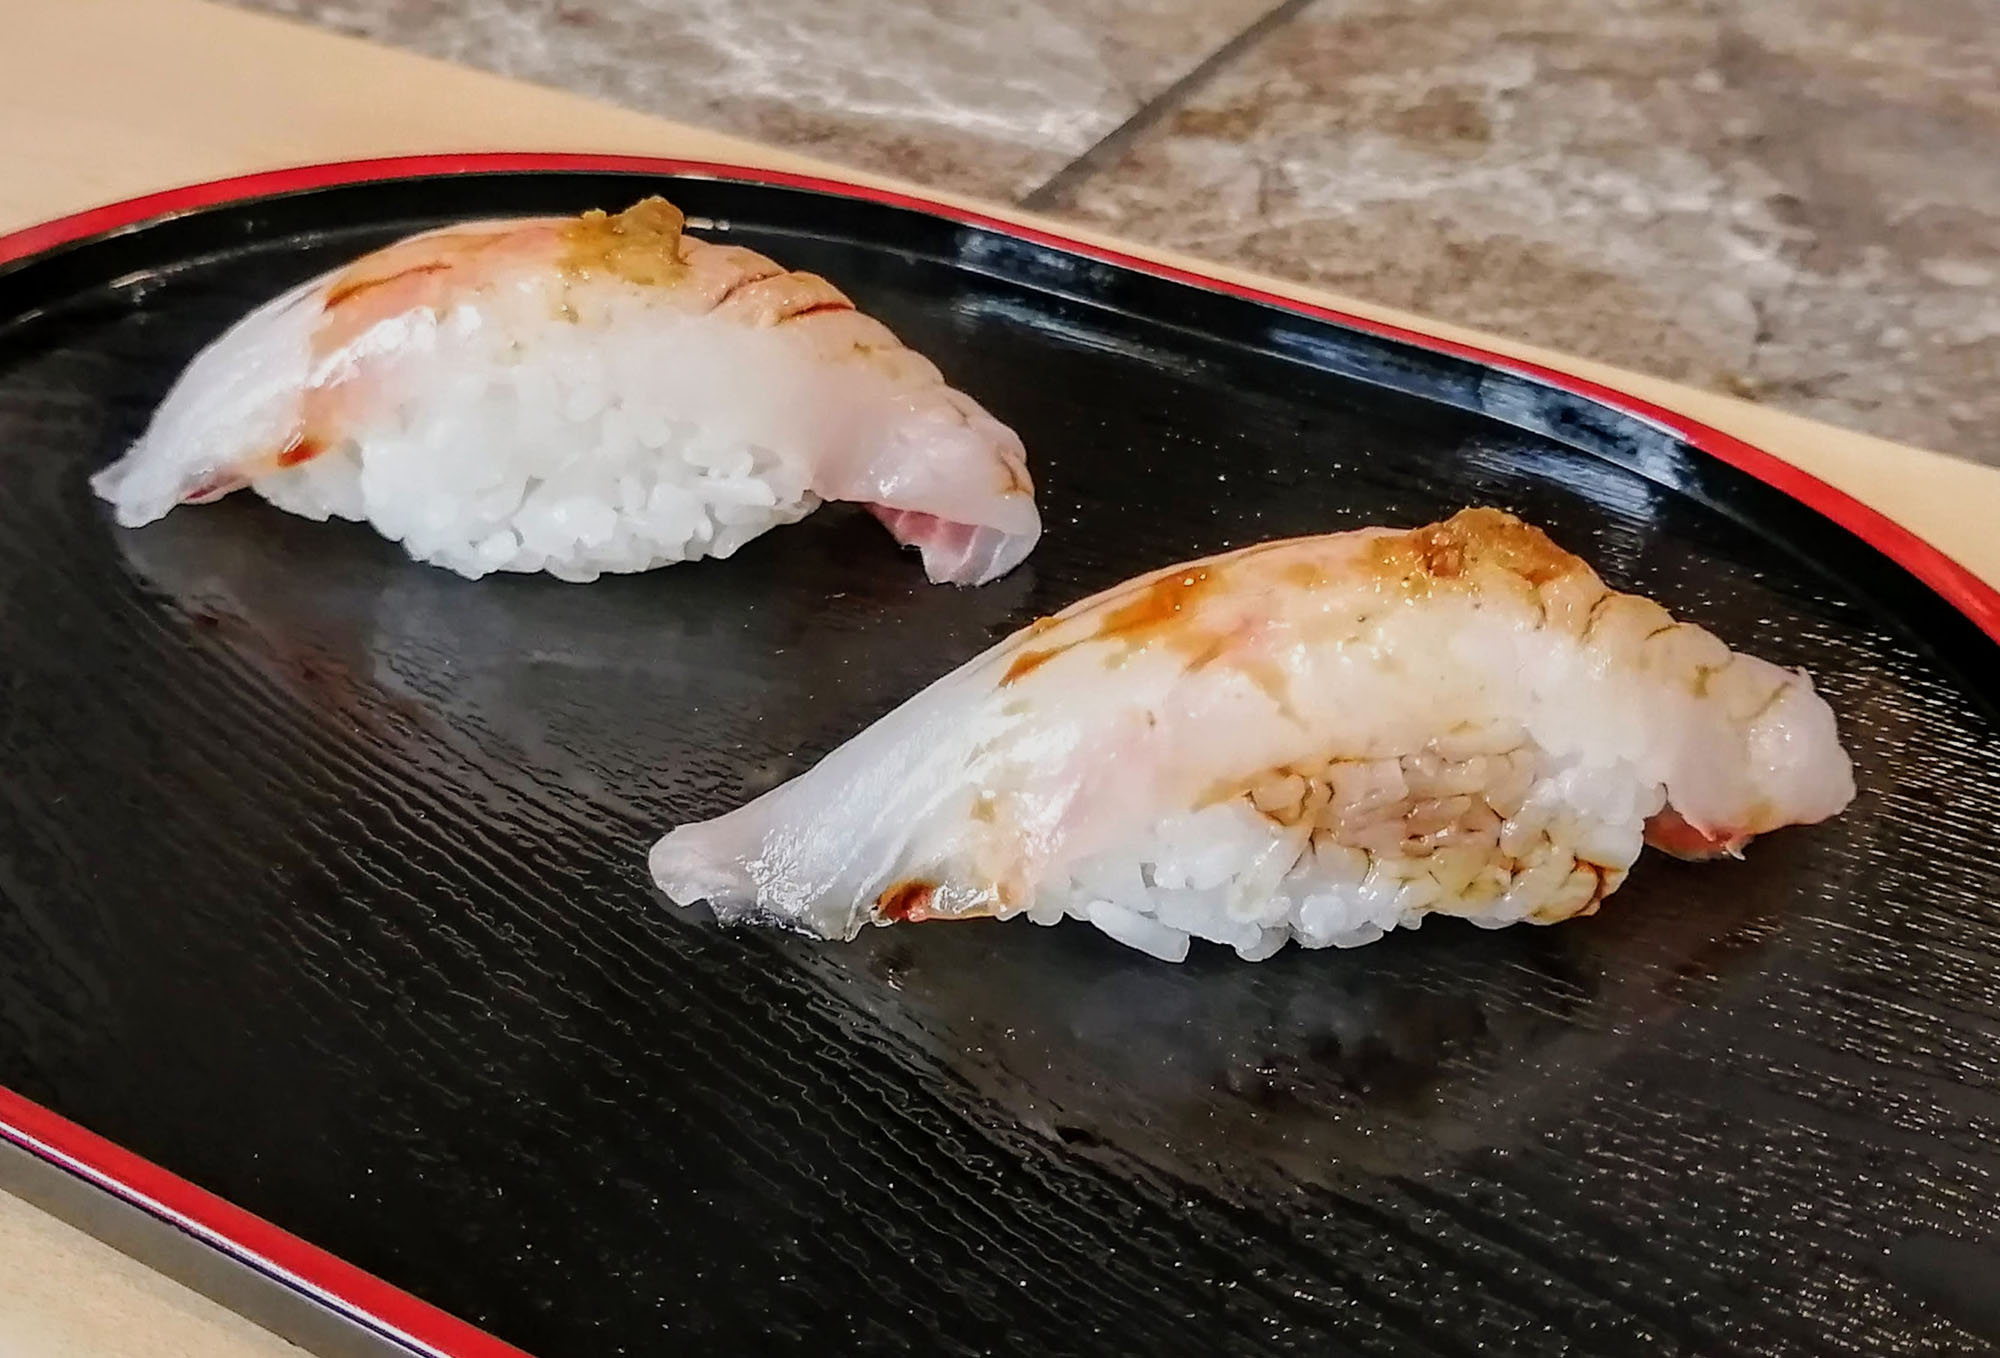  A close-up of two pieces of nigiri sushi with a dark brown sauce on top; the fish is white and the plate is black. Photo by Paul Young.